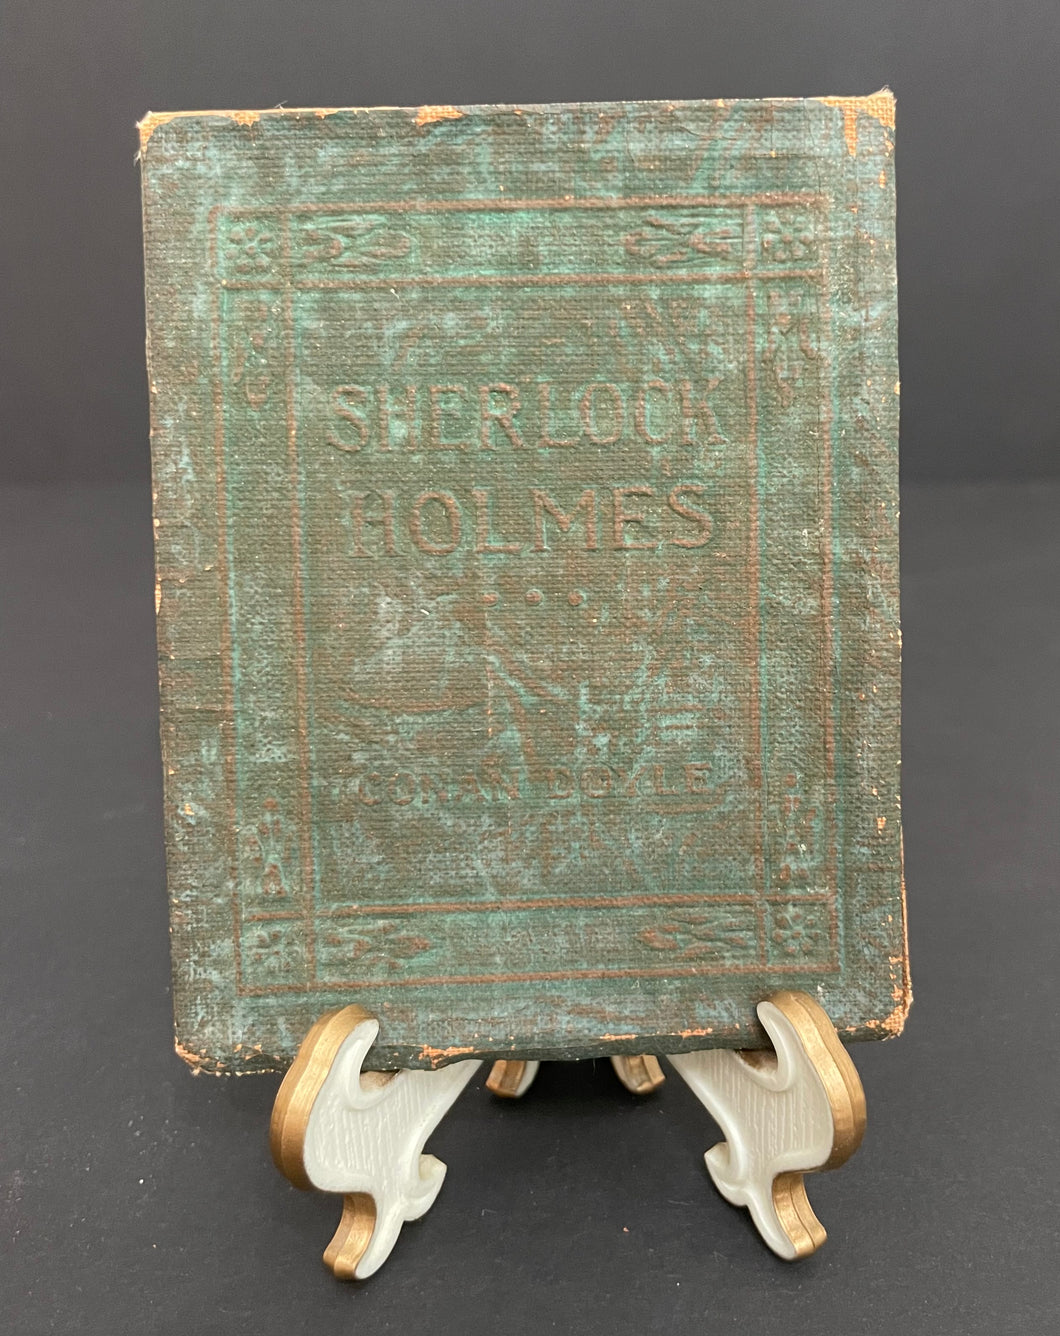 Antique Little Leather Library “Sherlock Holmes ” by Conan Doyle Book